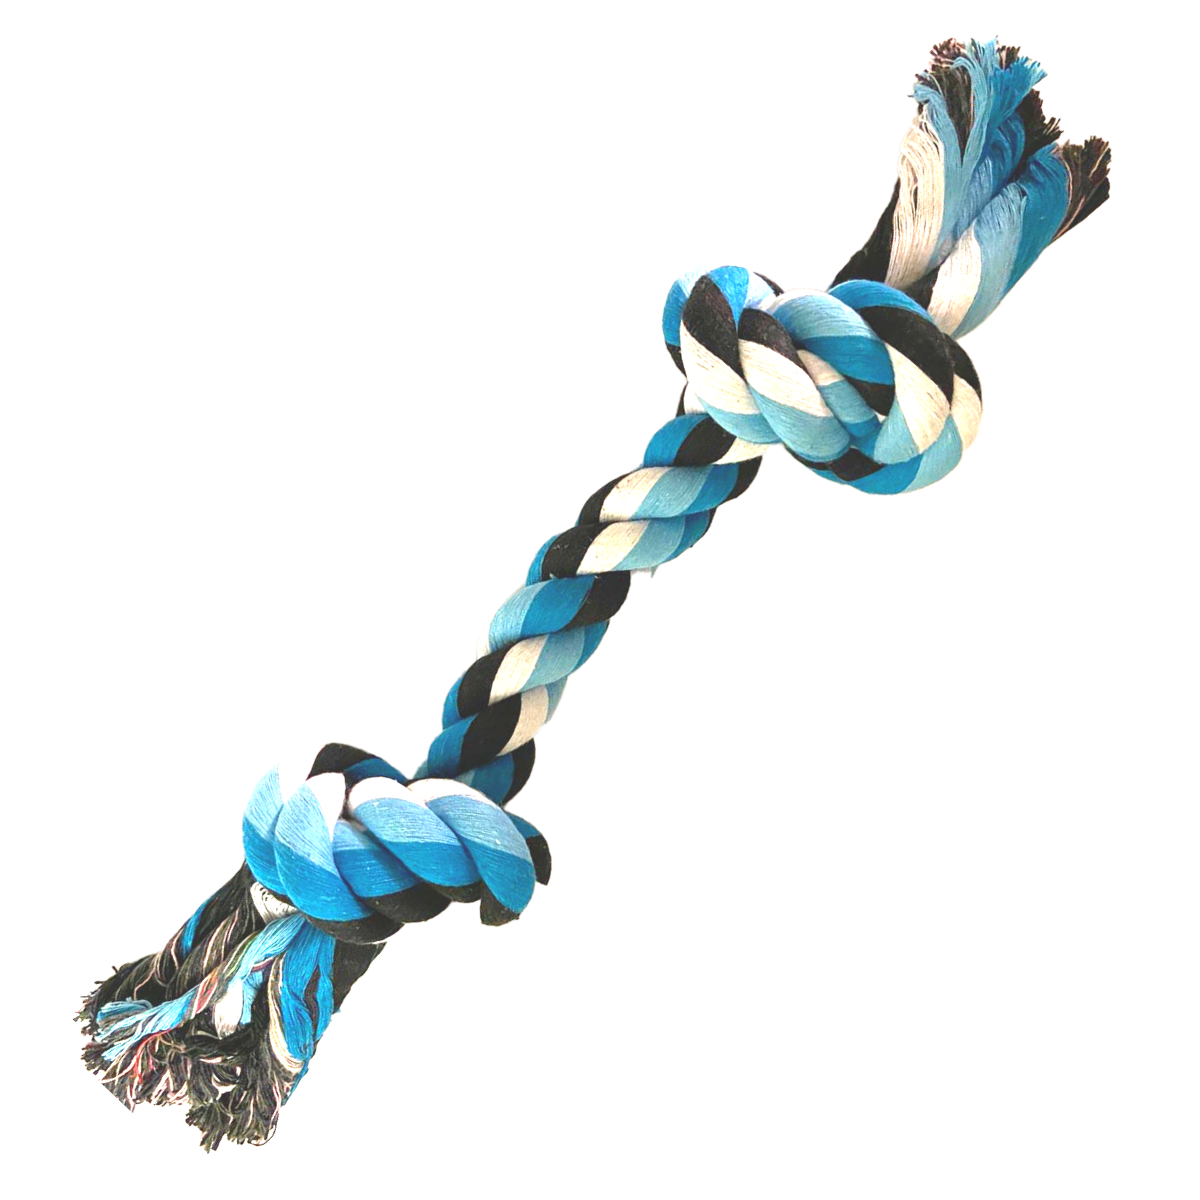 Chewy Interactive Rope Toy Set for Mildly Aggressive Dogs – Fetch